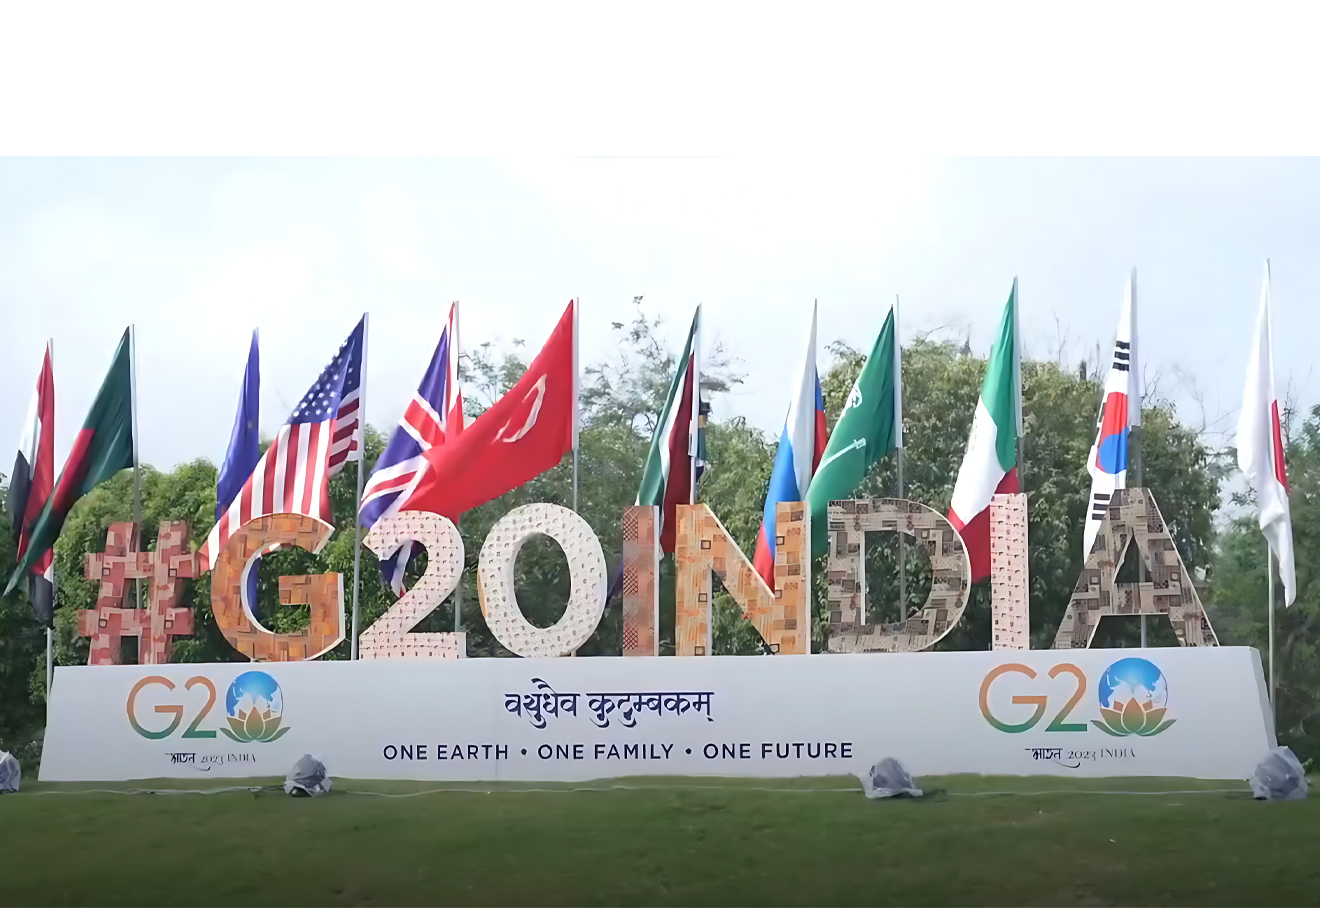 UP Govt To Impose Section 144 In Noida And Ghaziabad For G20 Summit